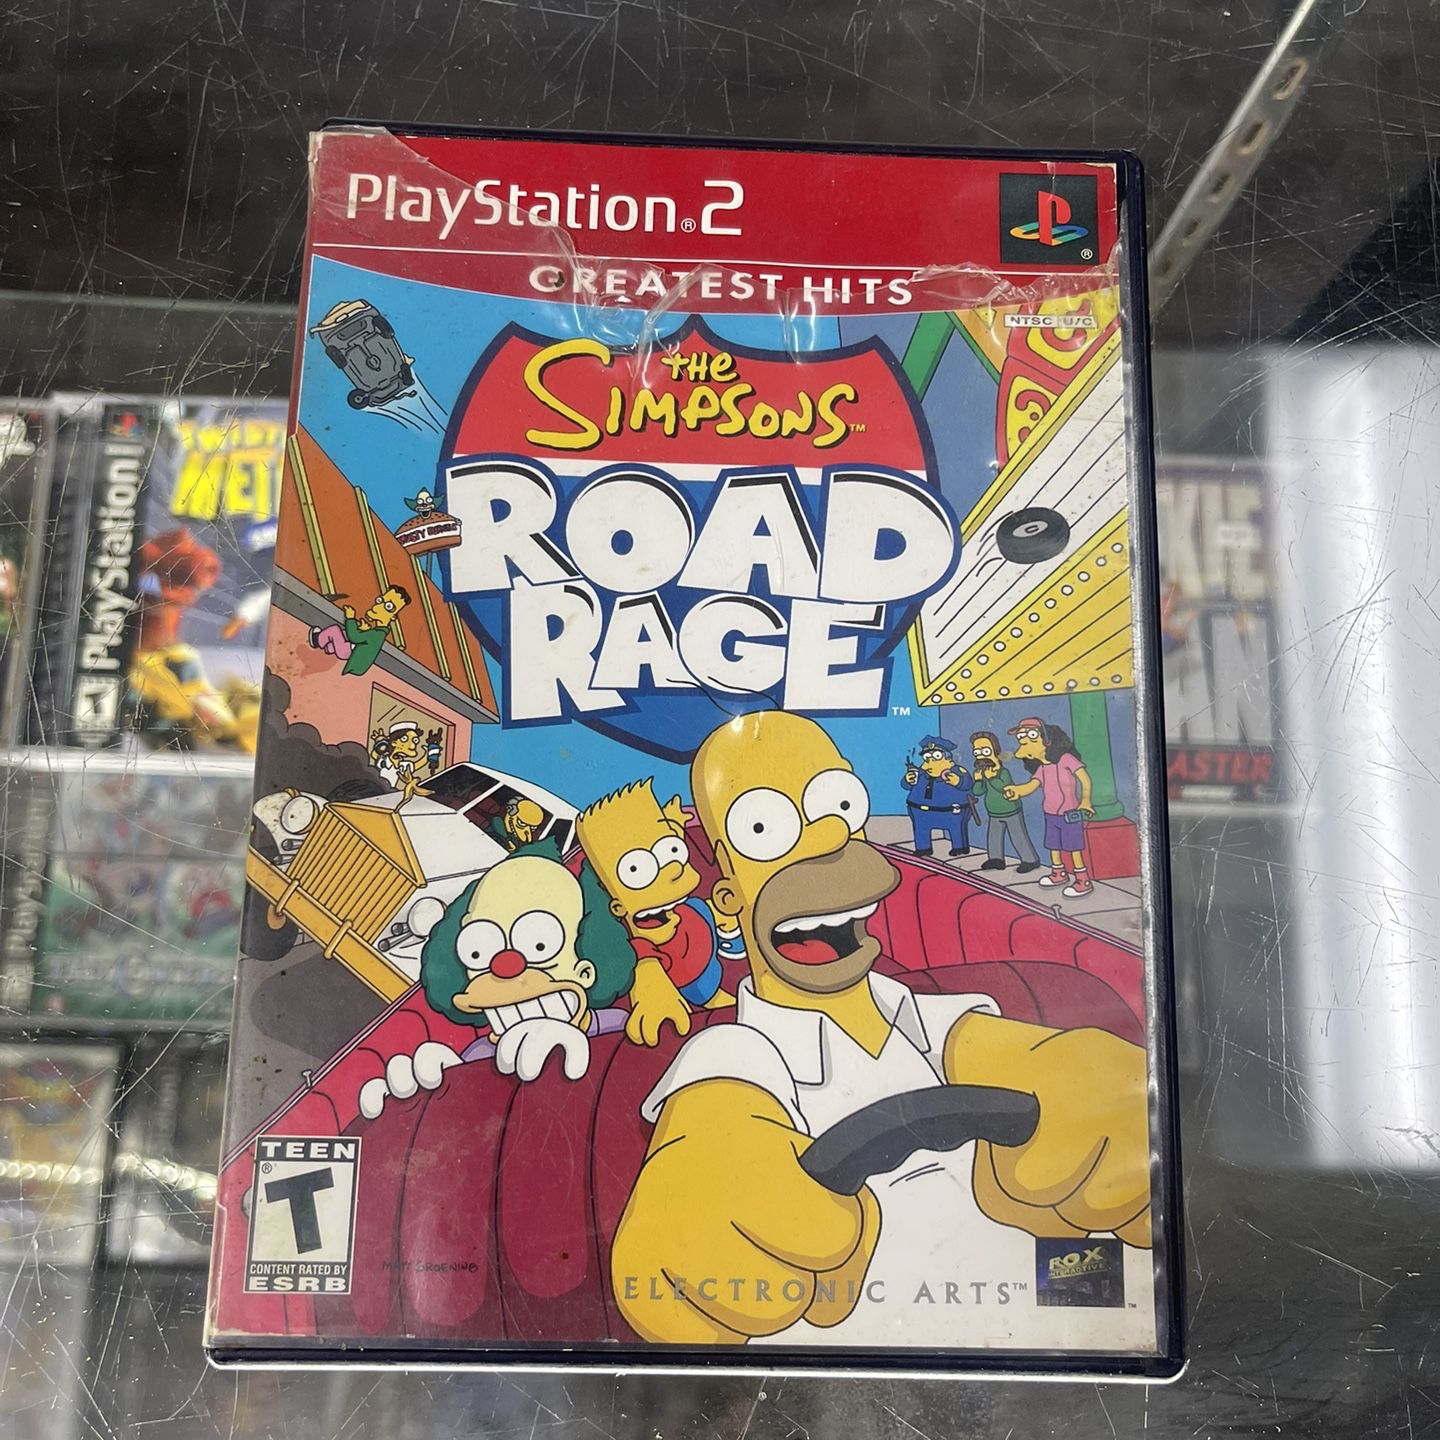 The Simpsons Road Rage Ps2 $35 Gamehogs 11am-7pm